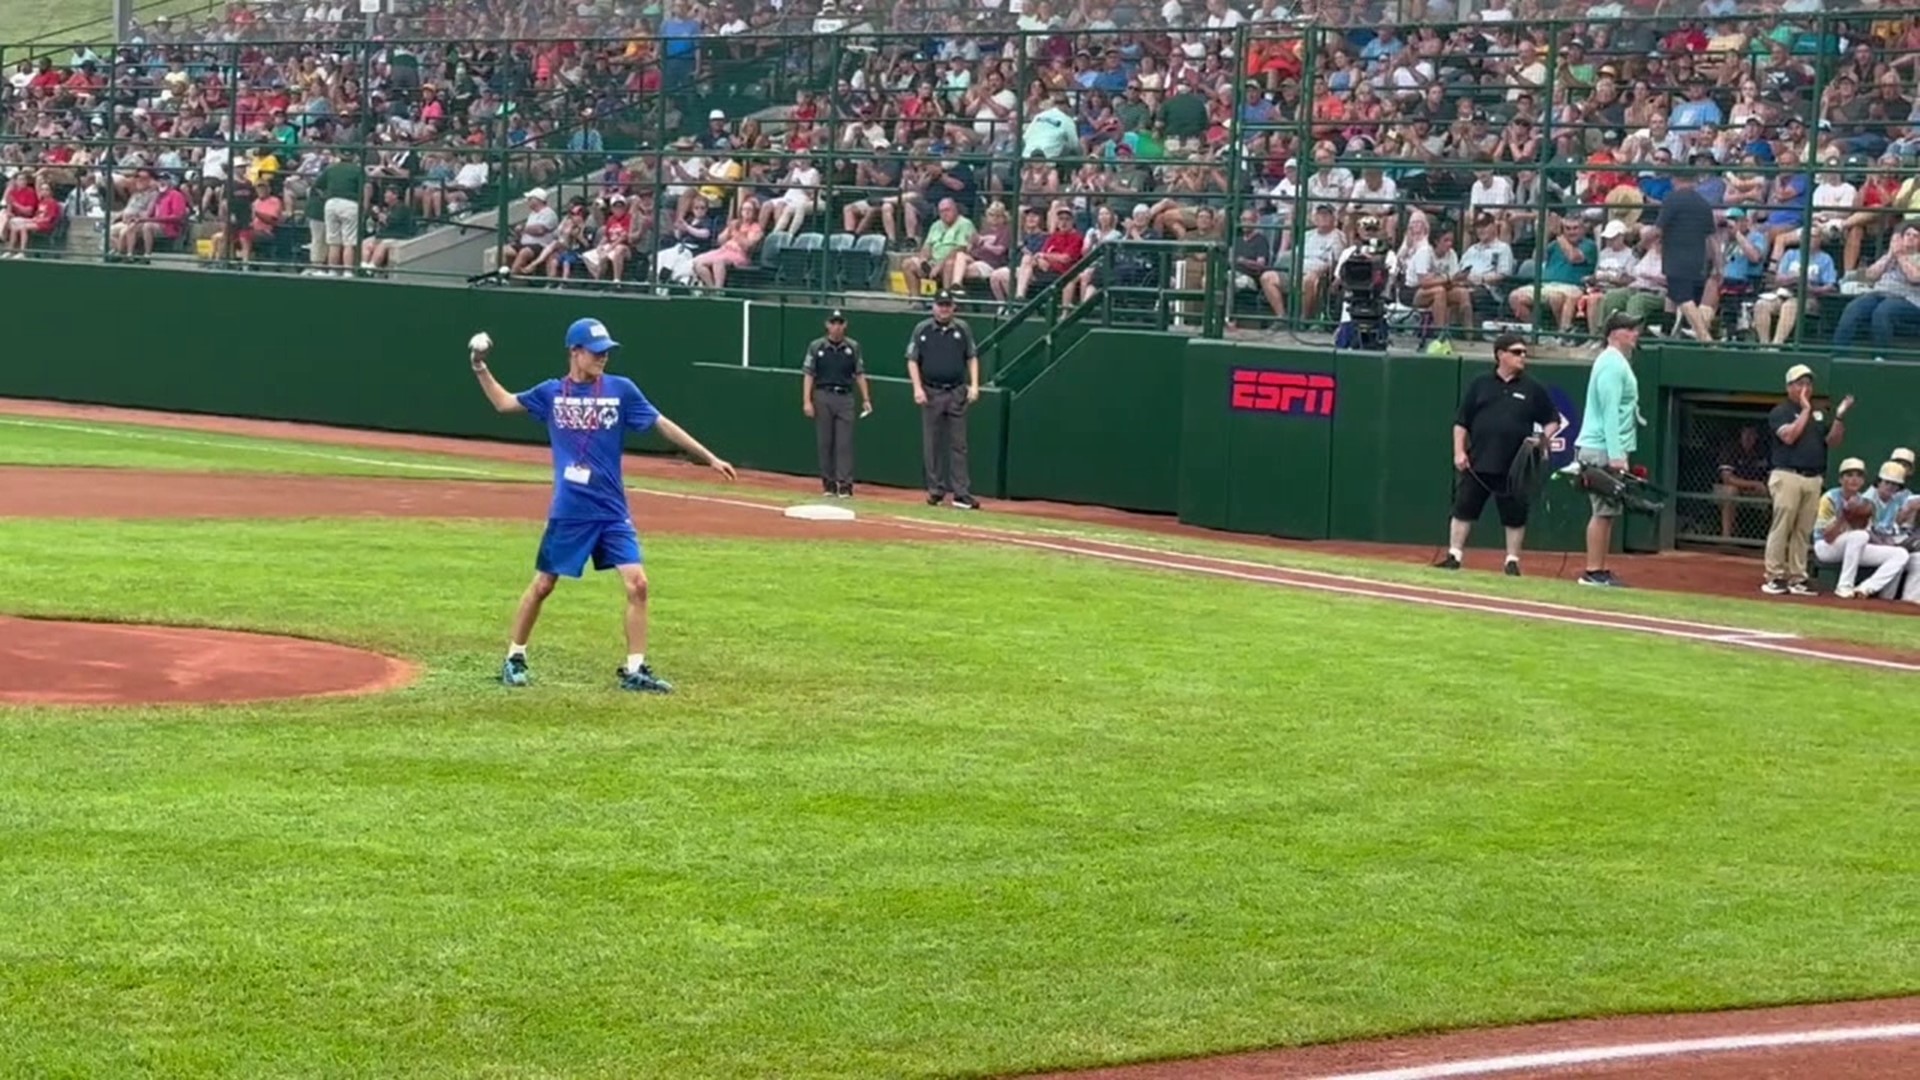 An athlete's dream was realized as Izaak Hobday threw out the first pitch at Monday night's Little League World Series game.